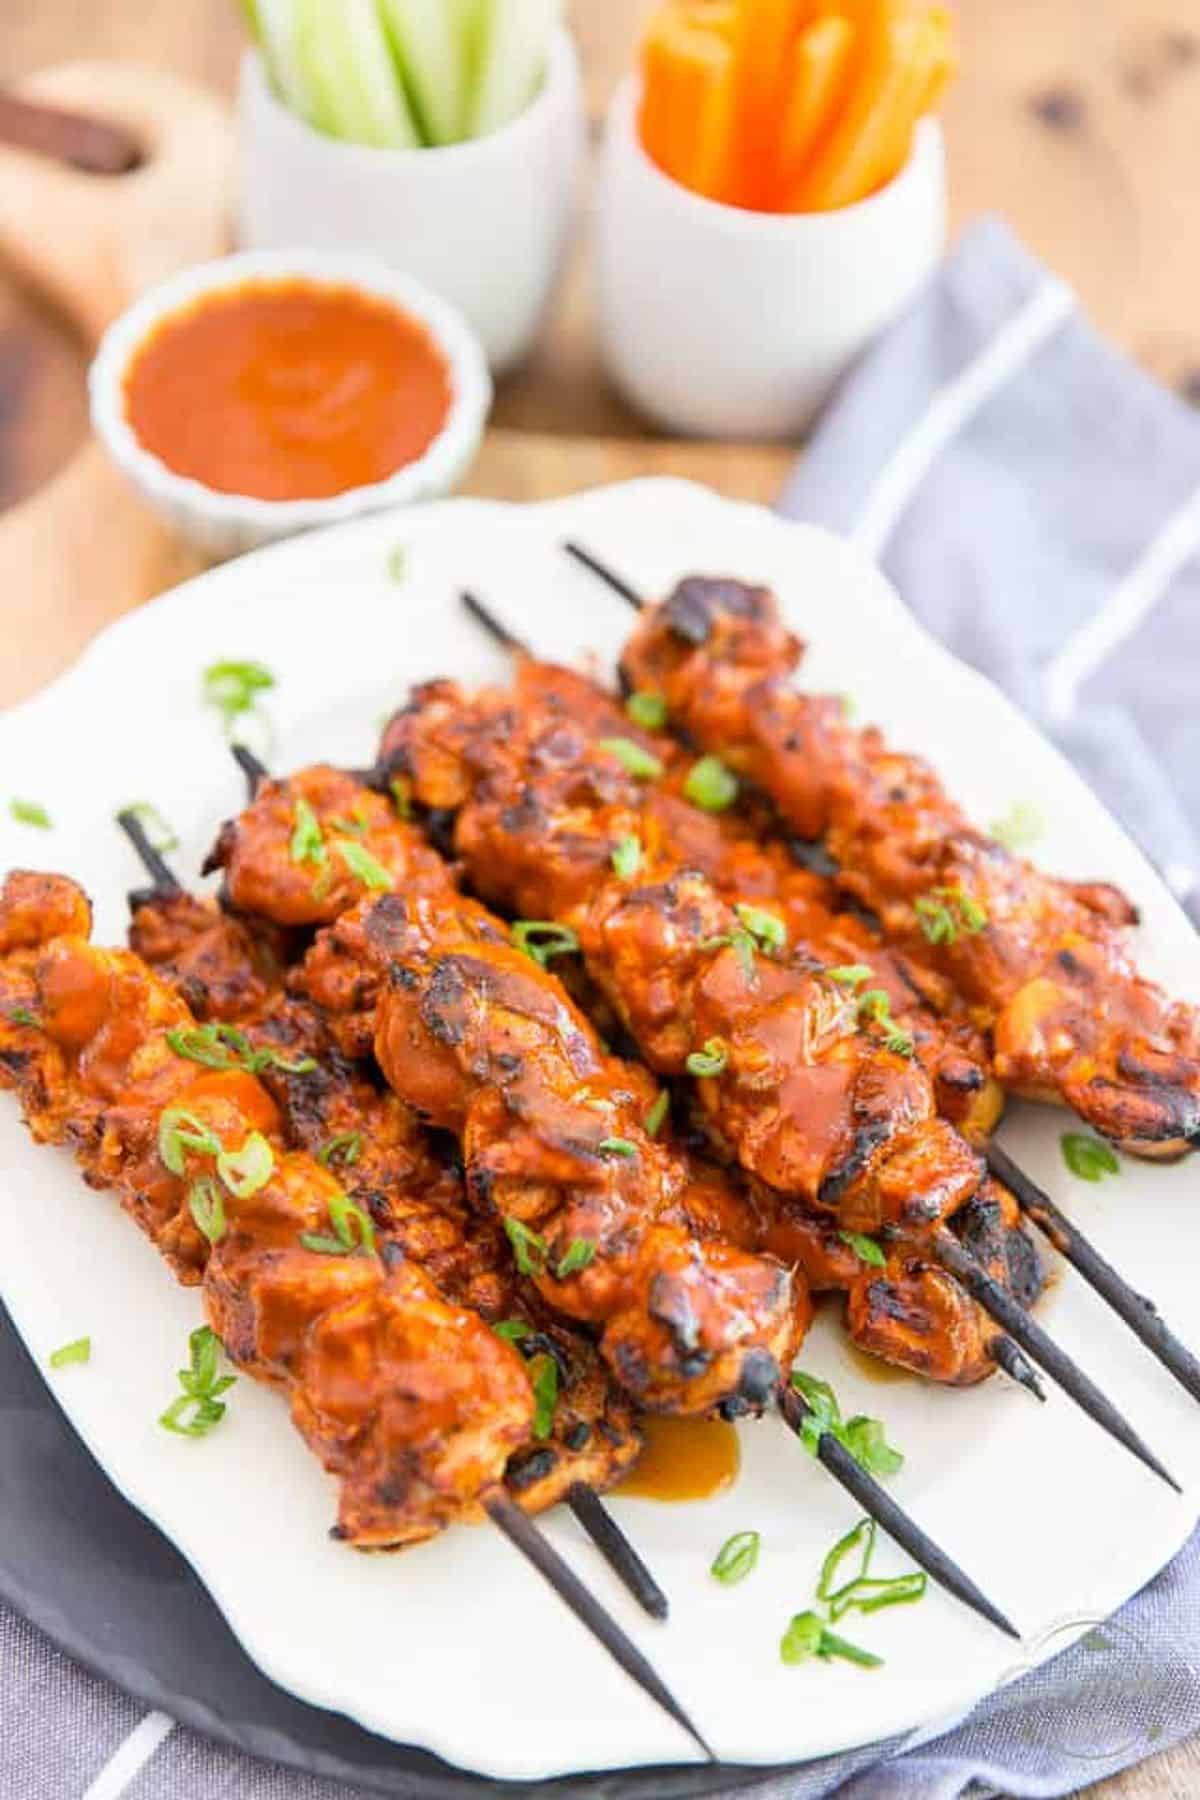 Buffalo chicken skewers with hot sauce on a plate.